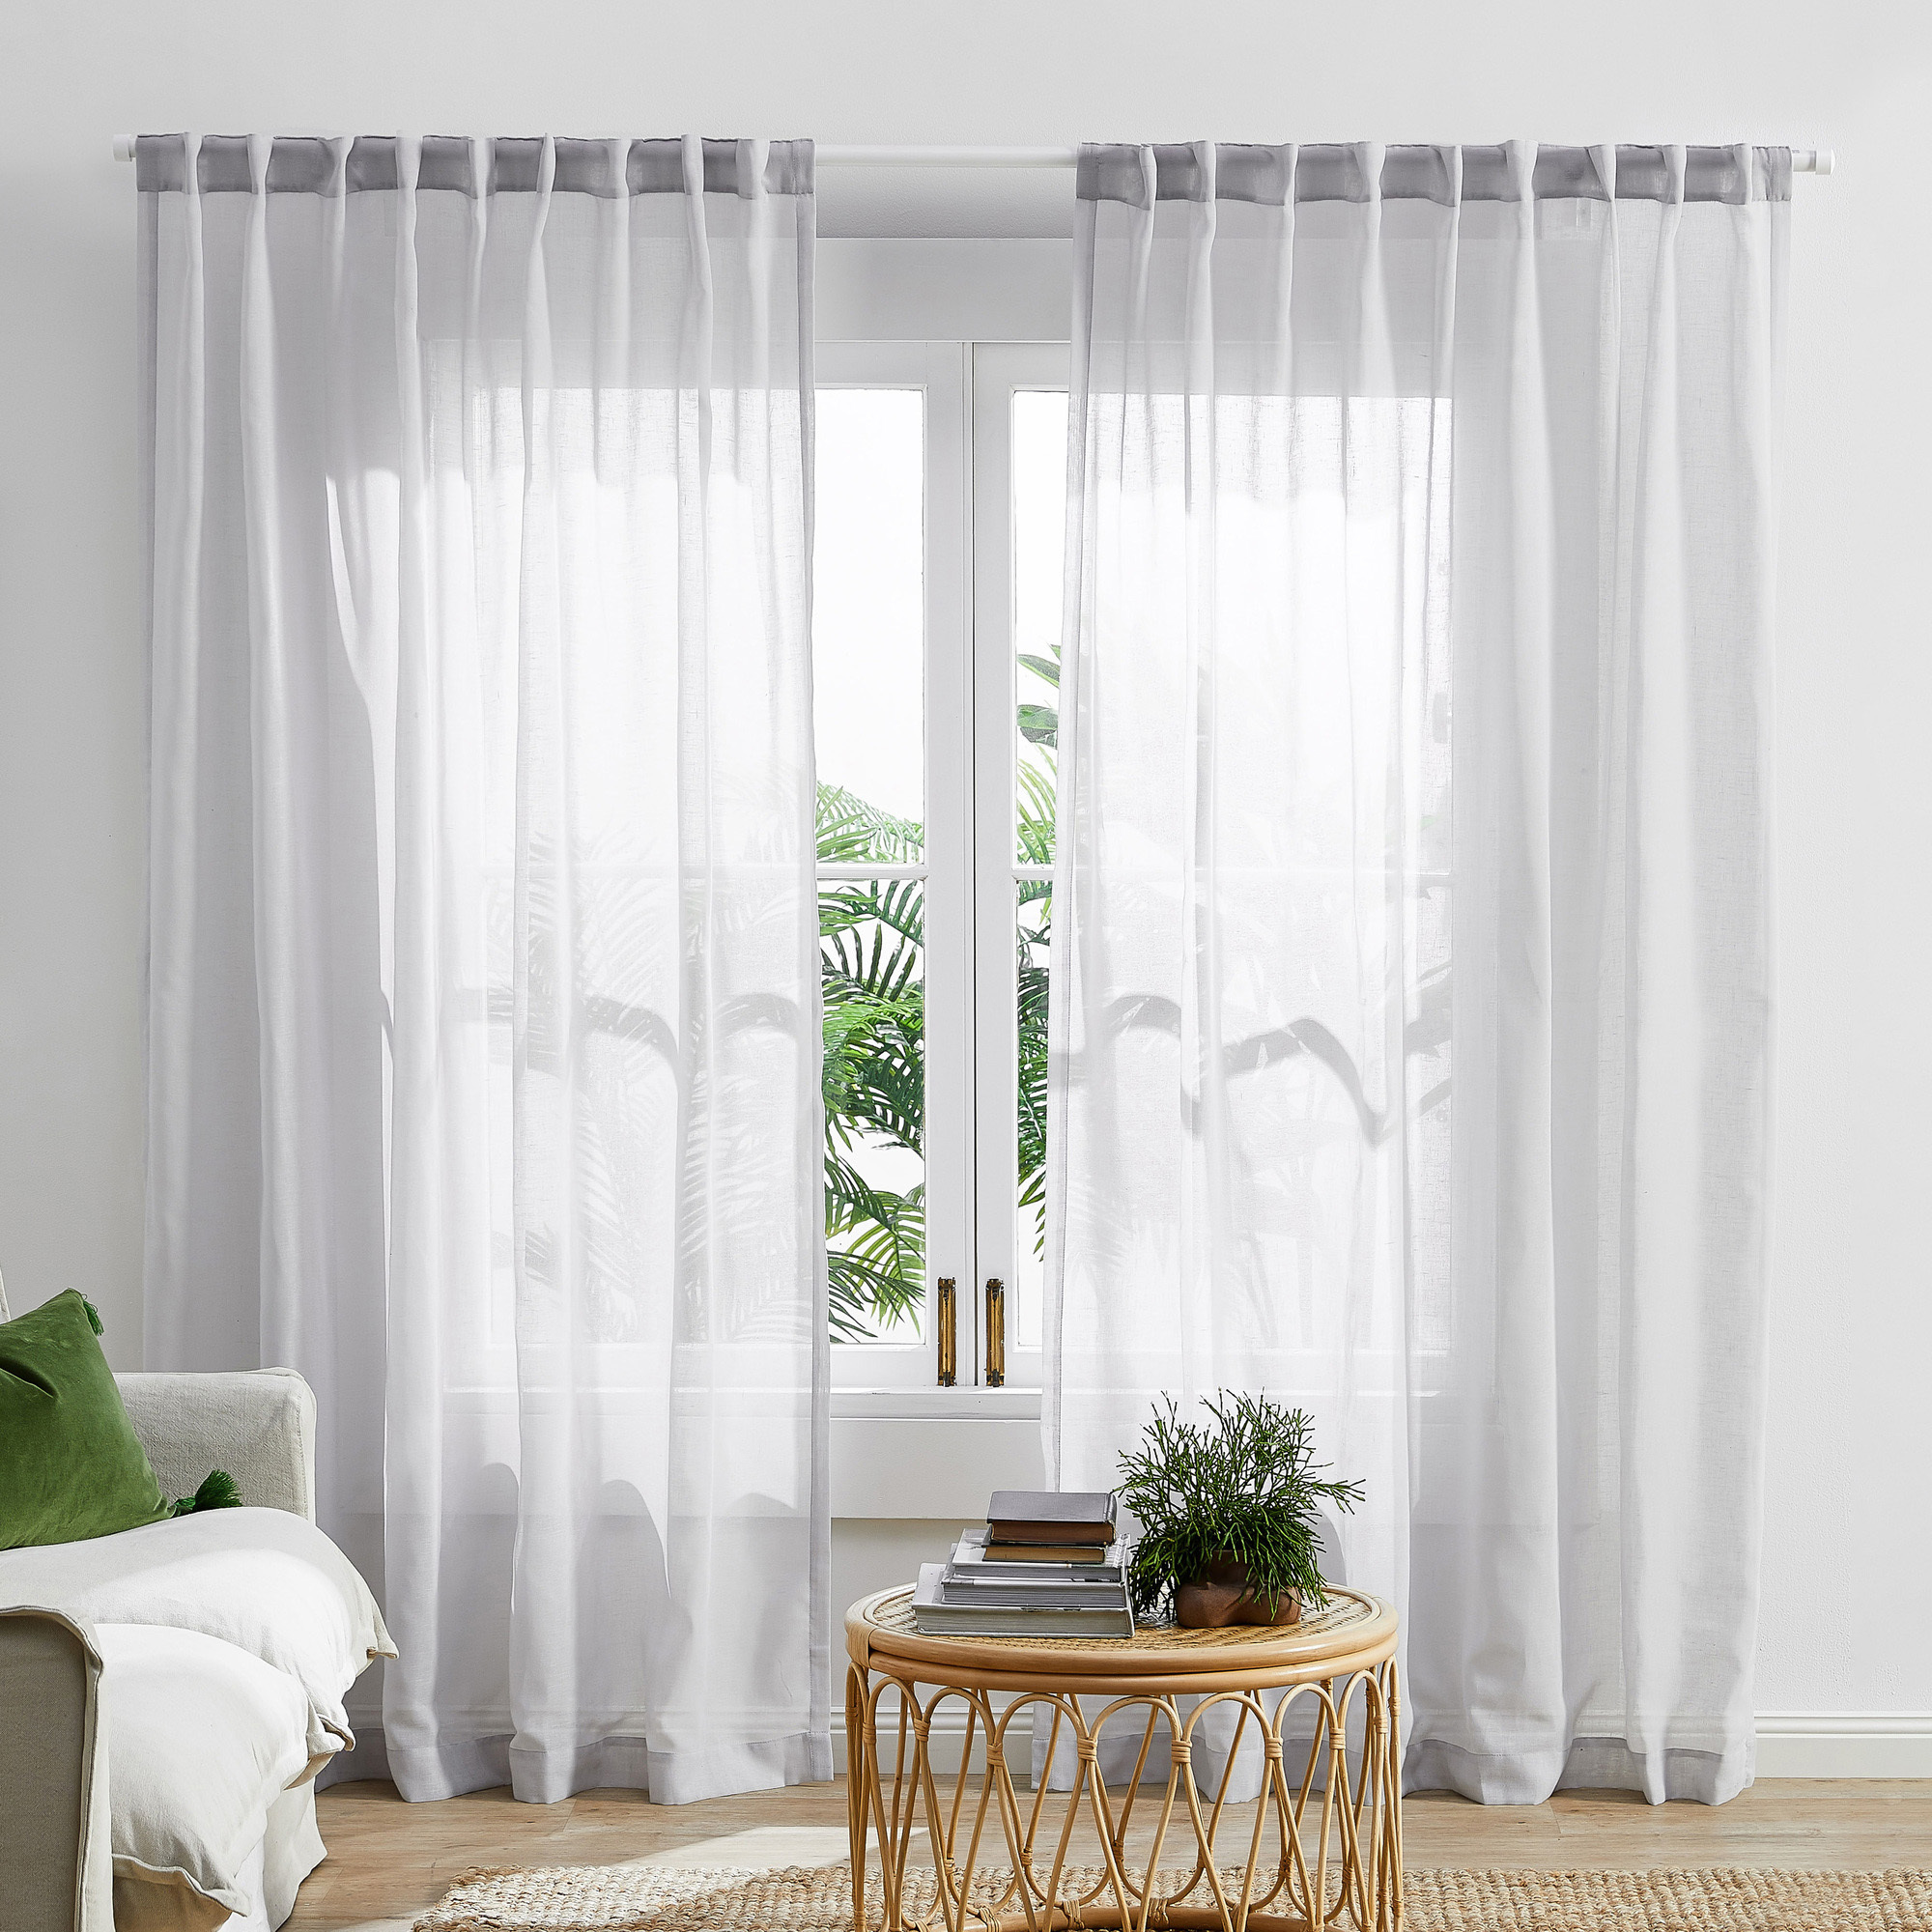 Temple Webster Silver Grey Valerian, How Long Should Sheer Curtains Be